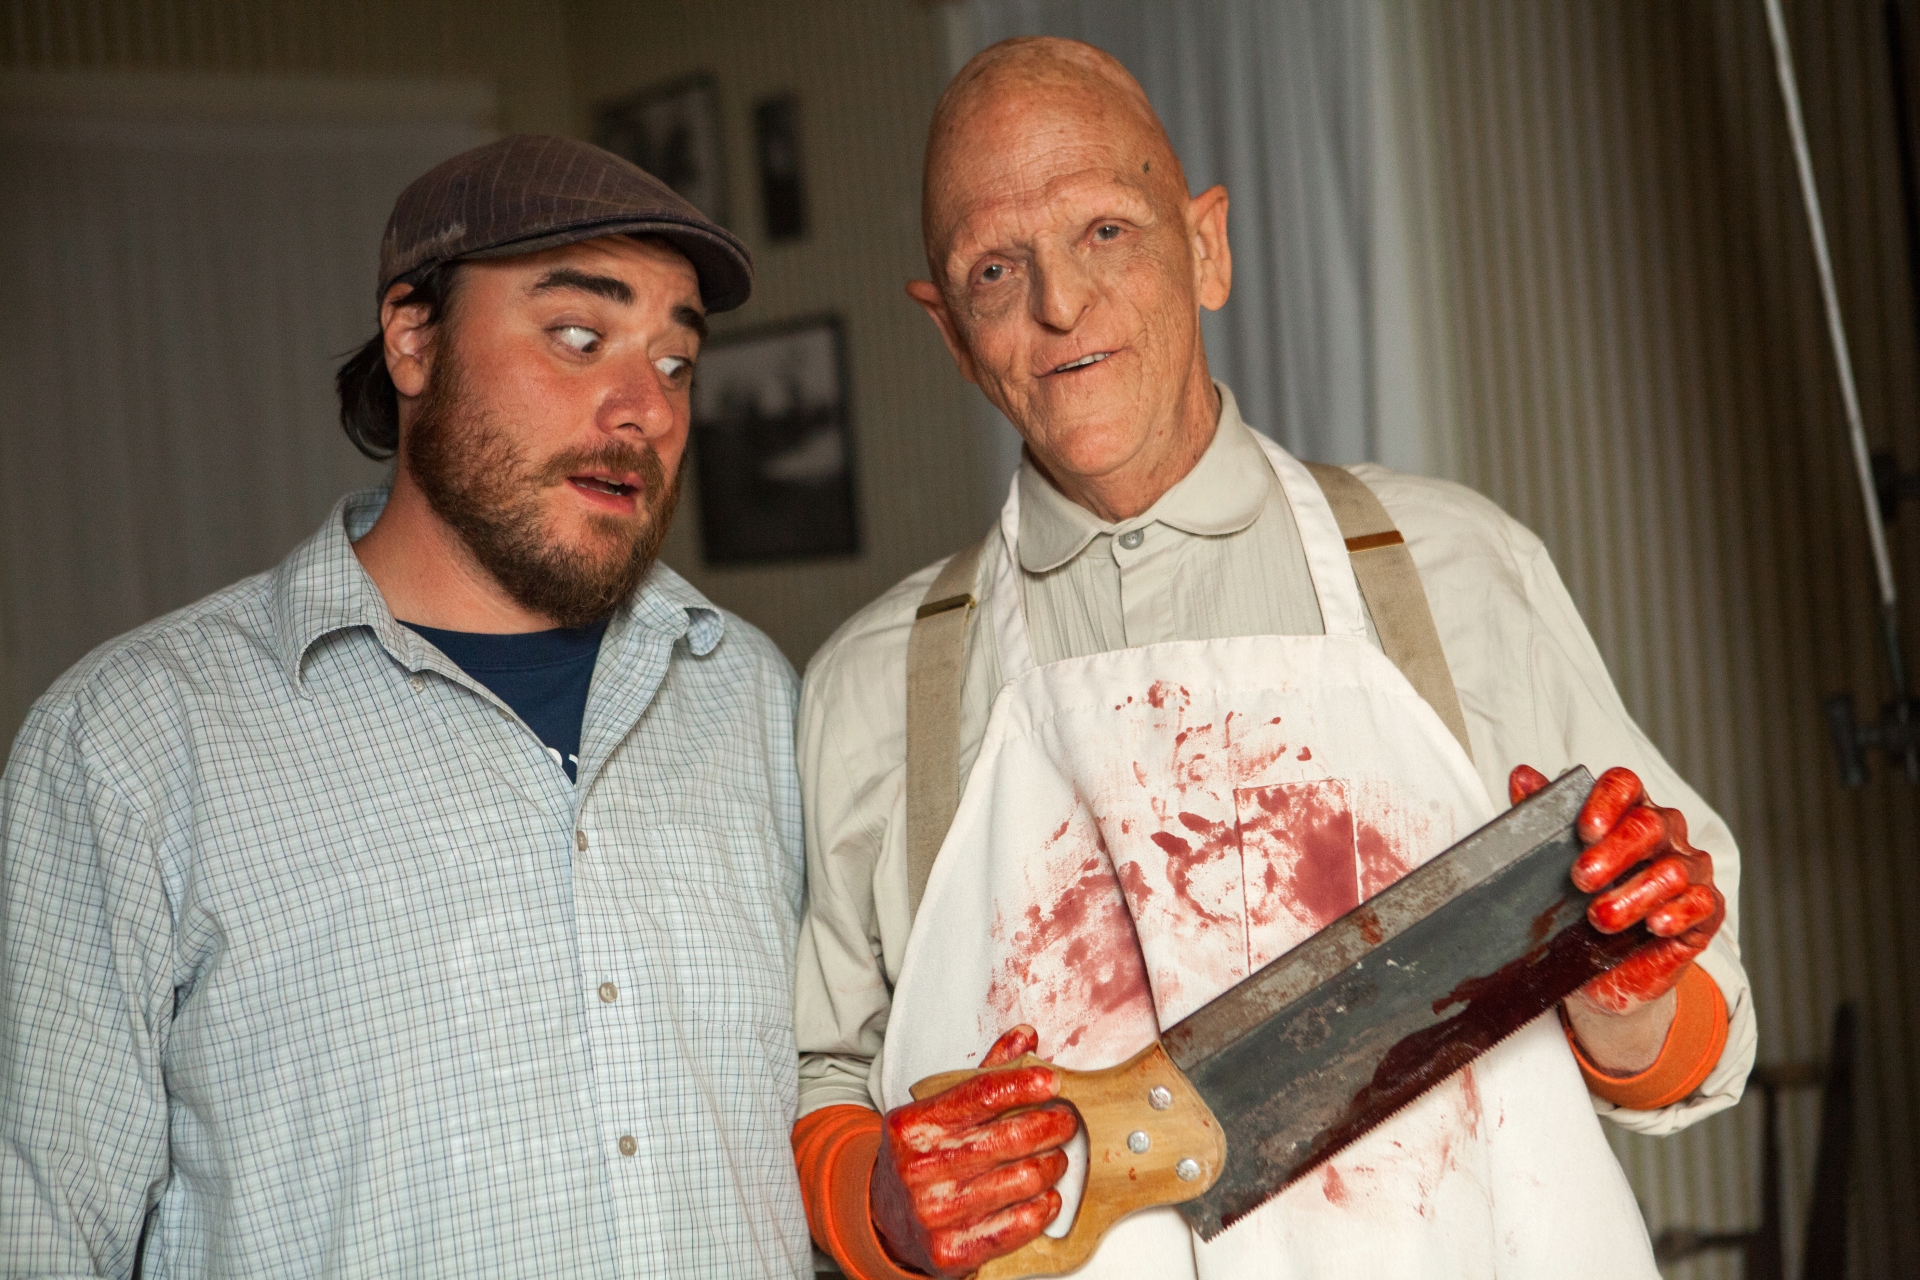 Co-writer/director Duane Graves with Michael Berryman (One Flew Over the Cuckoo's Nest, Weird Science, The Hills Have Eyes), on the set of RED ON YELLA, KILL A FELLA, December, 2012